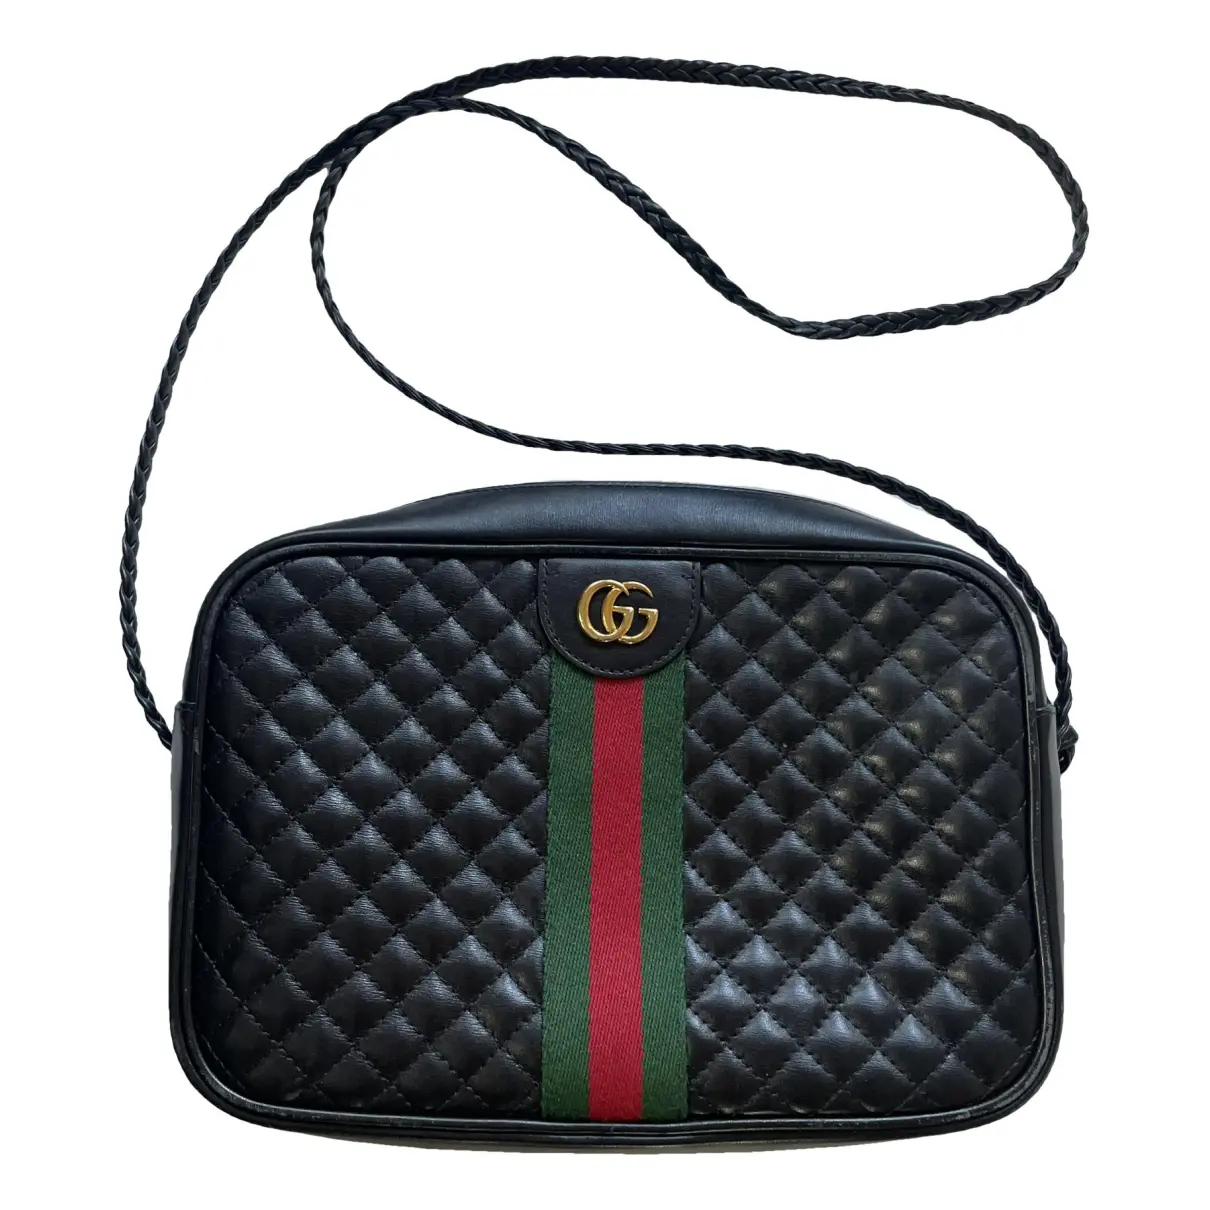 Ophidia Compartment Messenger leather crossbody bag Gucci